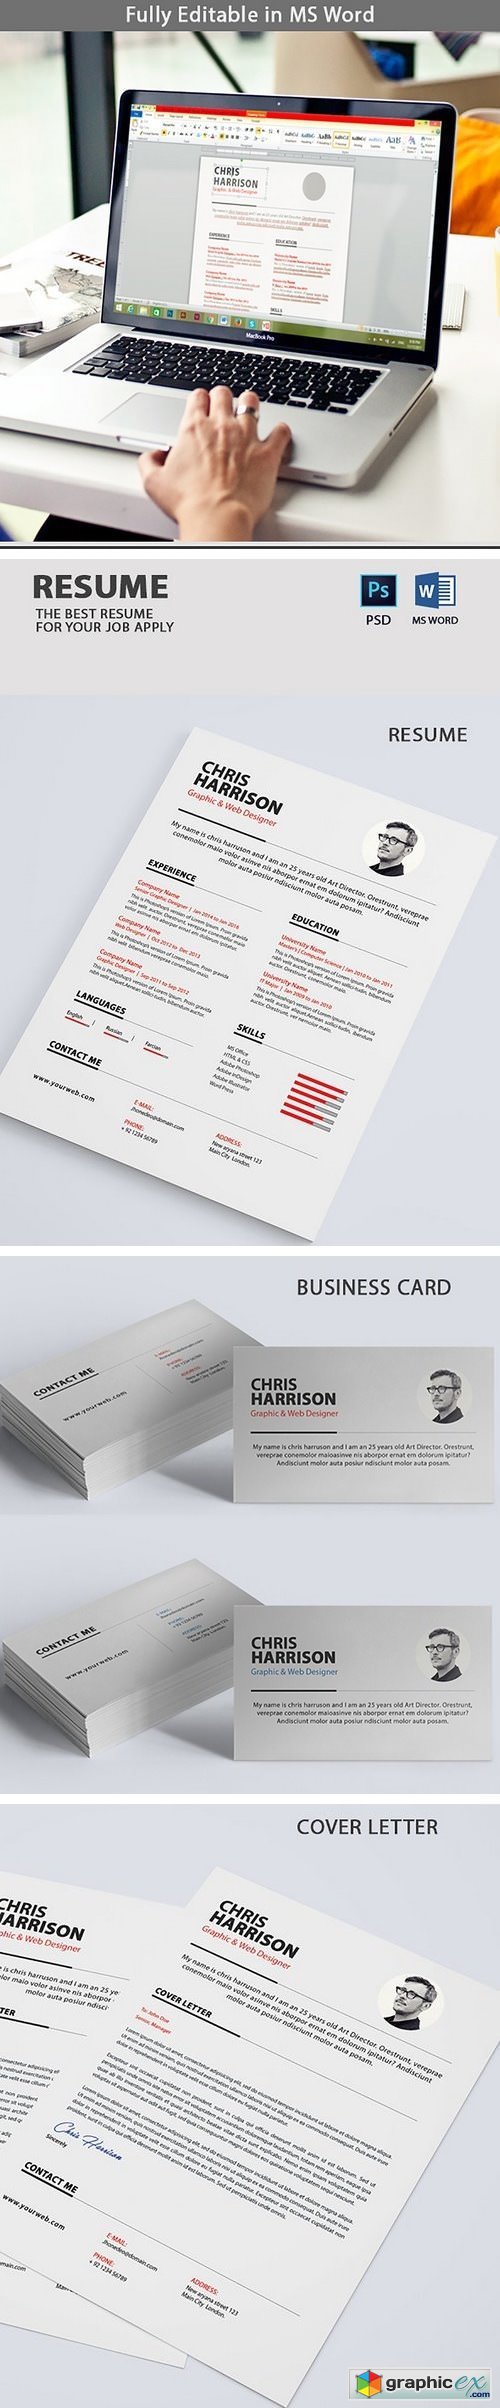 Clean Resume With Business Card